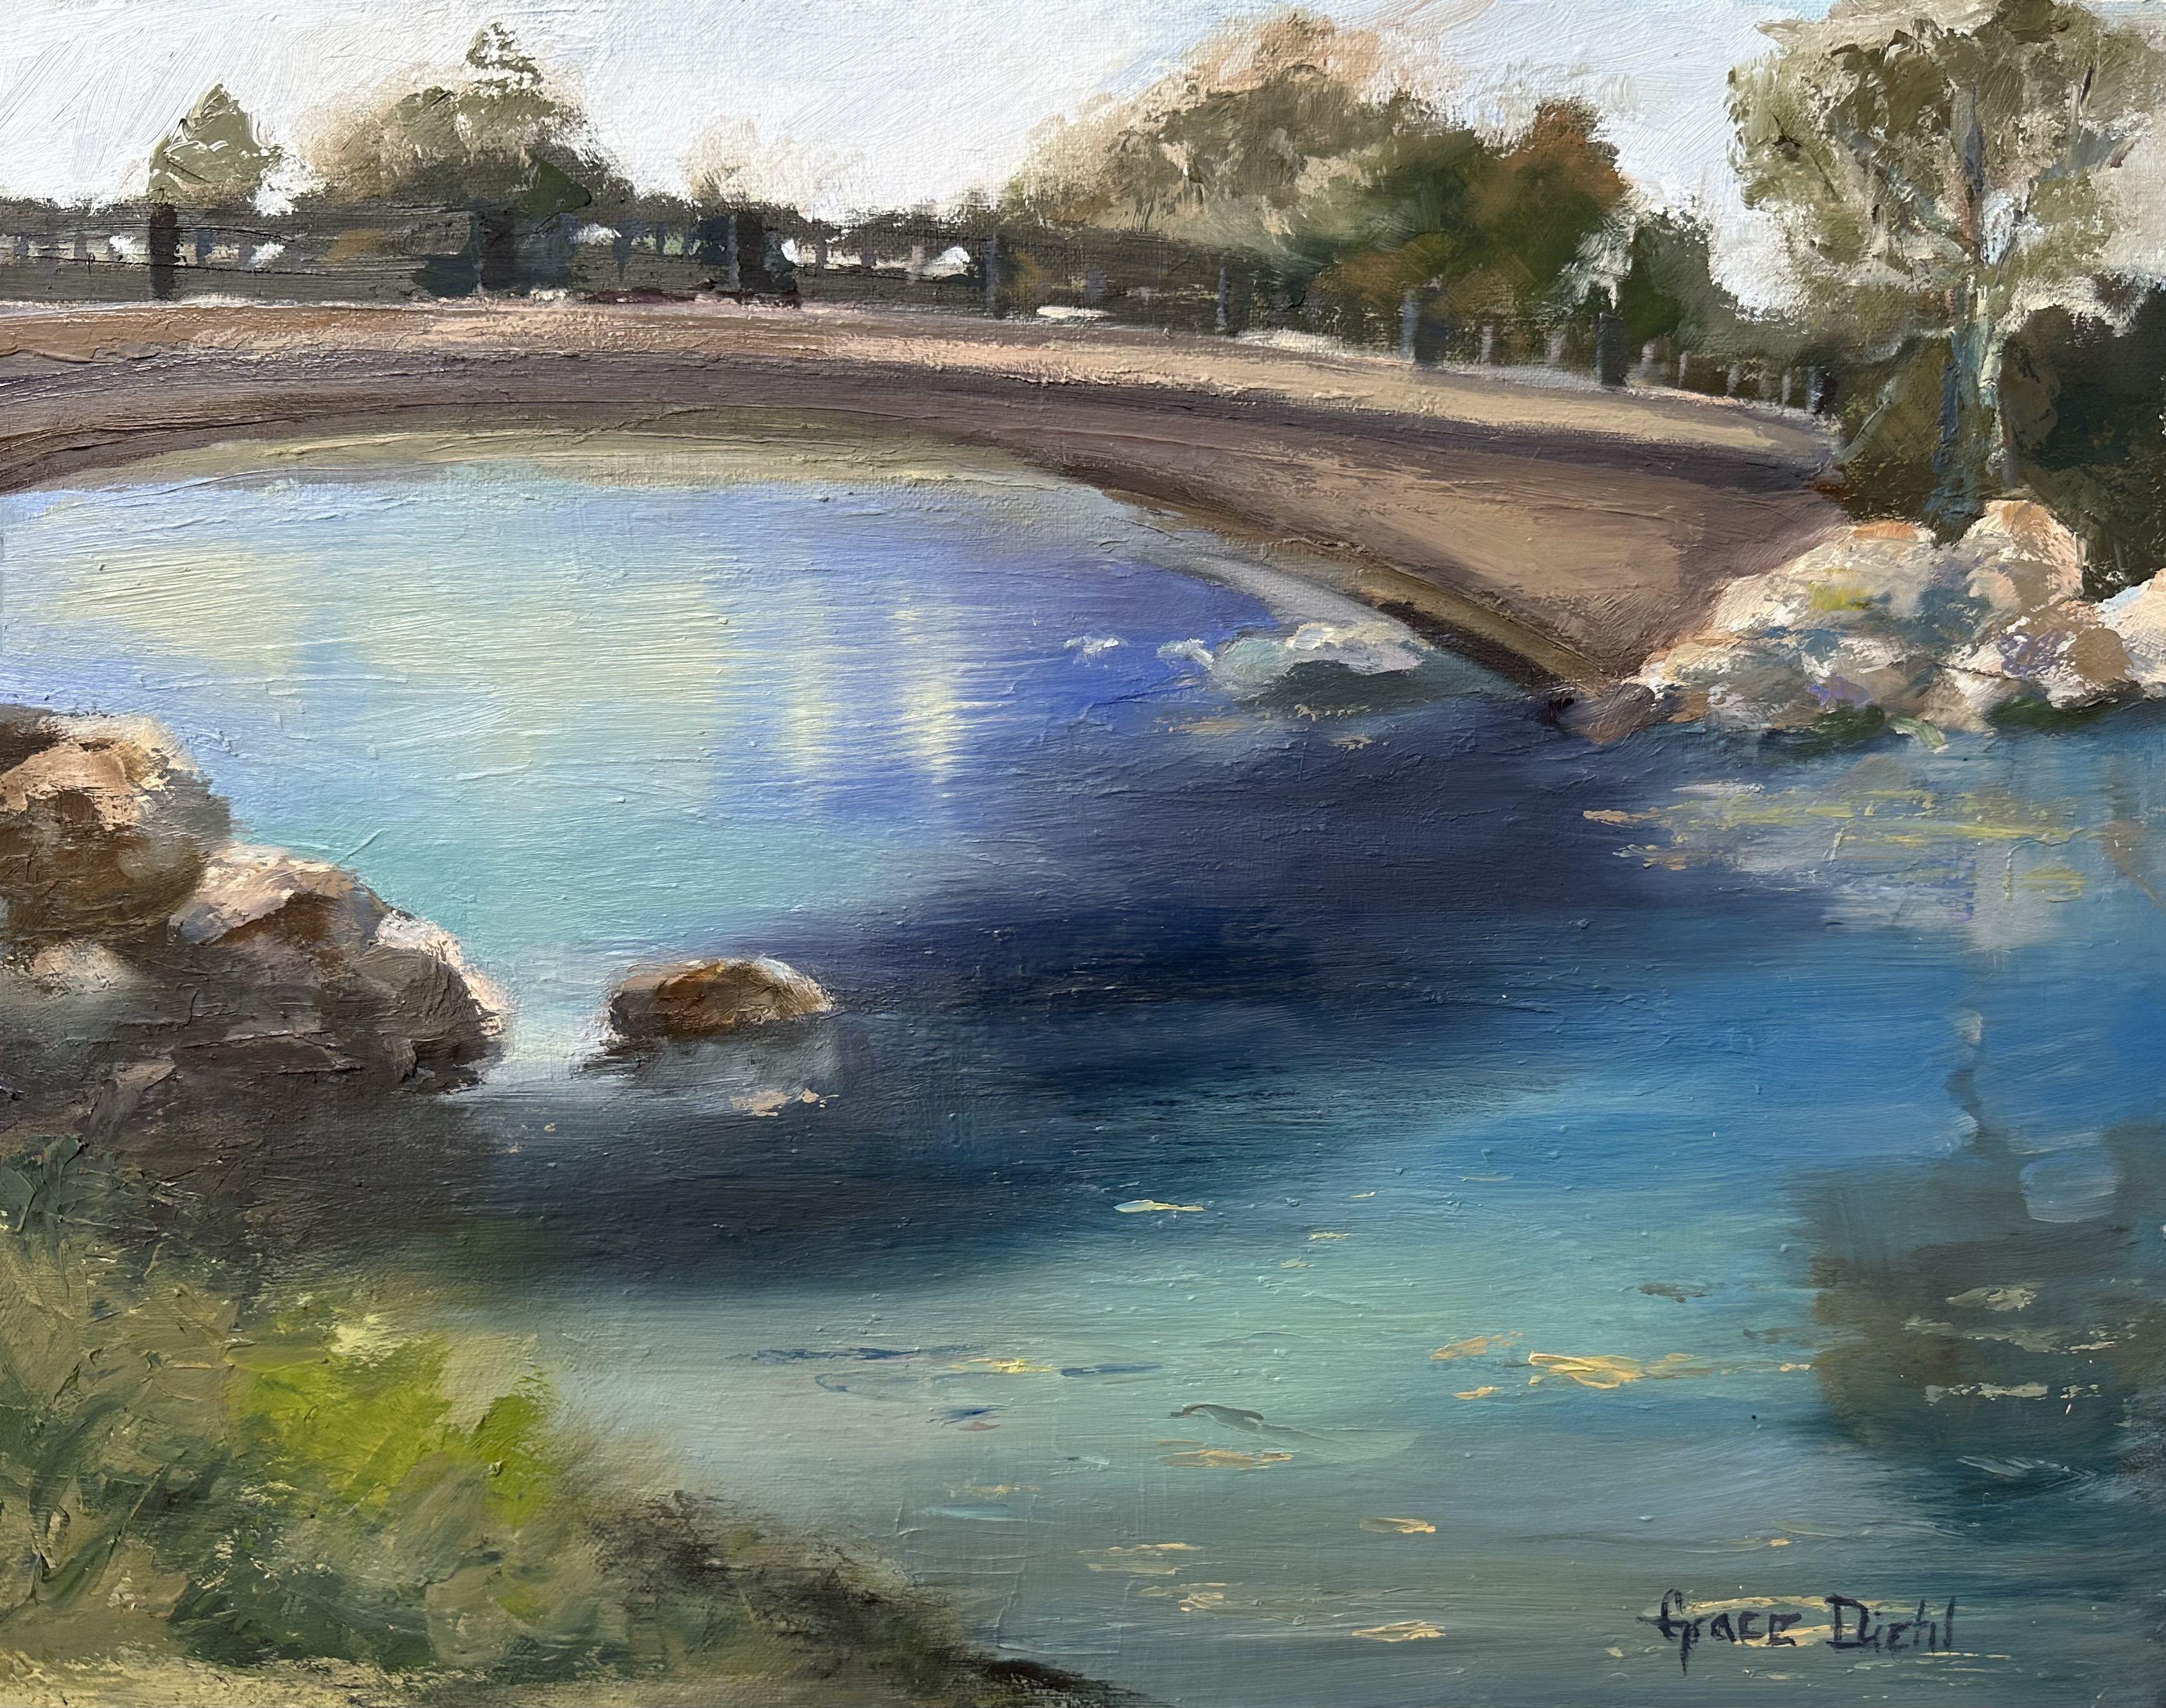 This is the second time I've painted the Irvine Park bridge in oil during a plein air session. It's a lovely location that offers a serene and tranquil atmosphere, perfect for anyone looking for a peaceful place to relax and appreciate nature. ::